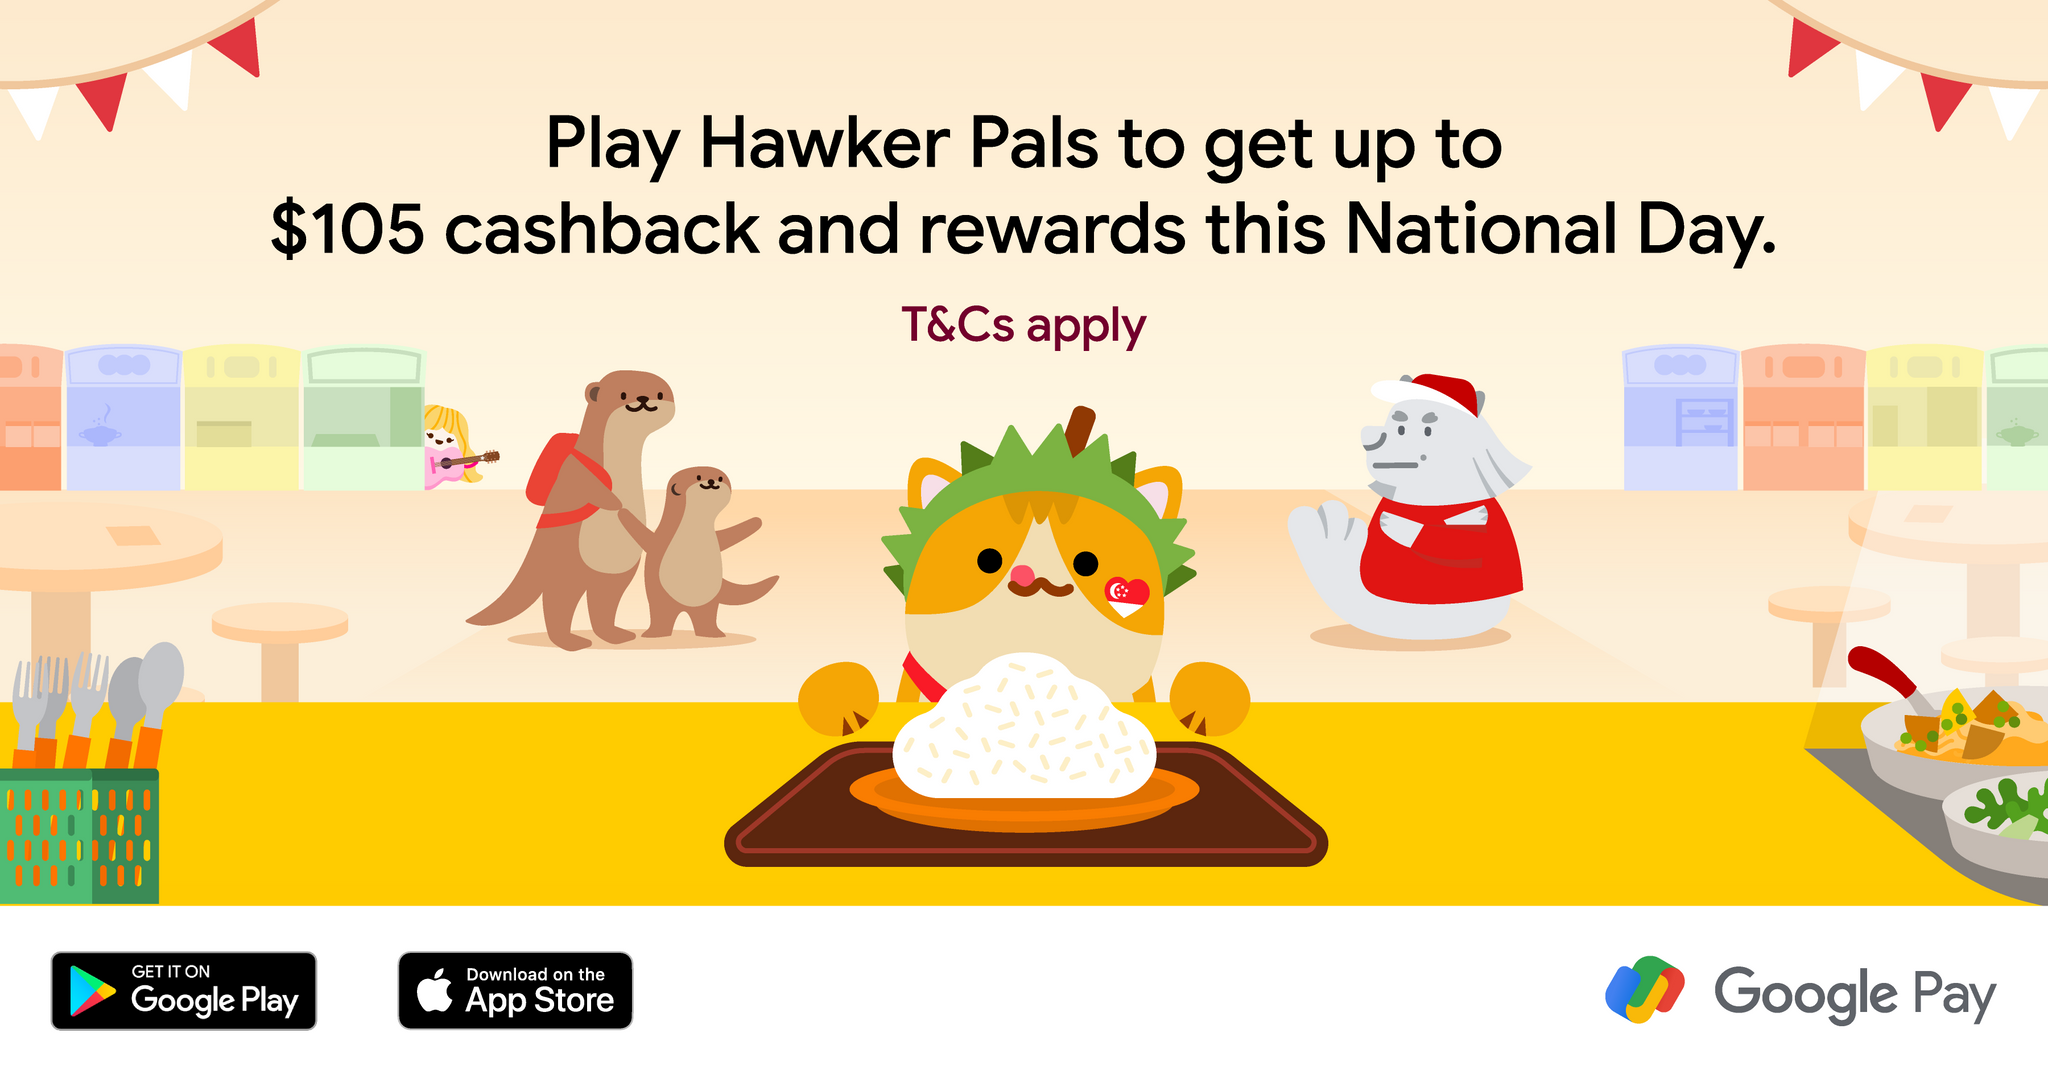 Earn up to $105 cashback this National Day with Google Pay